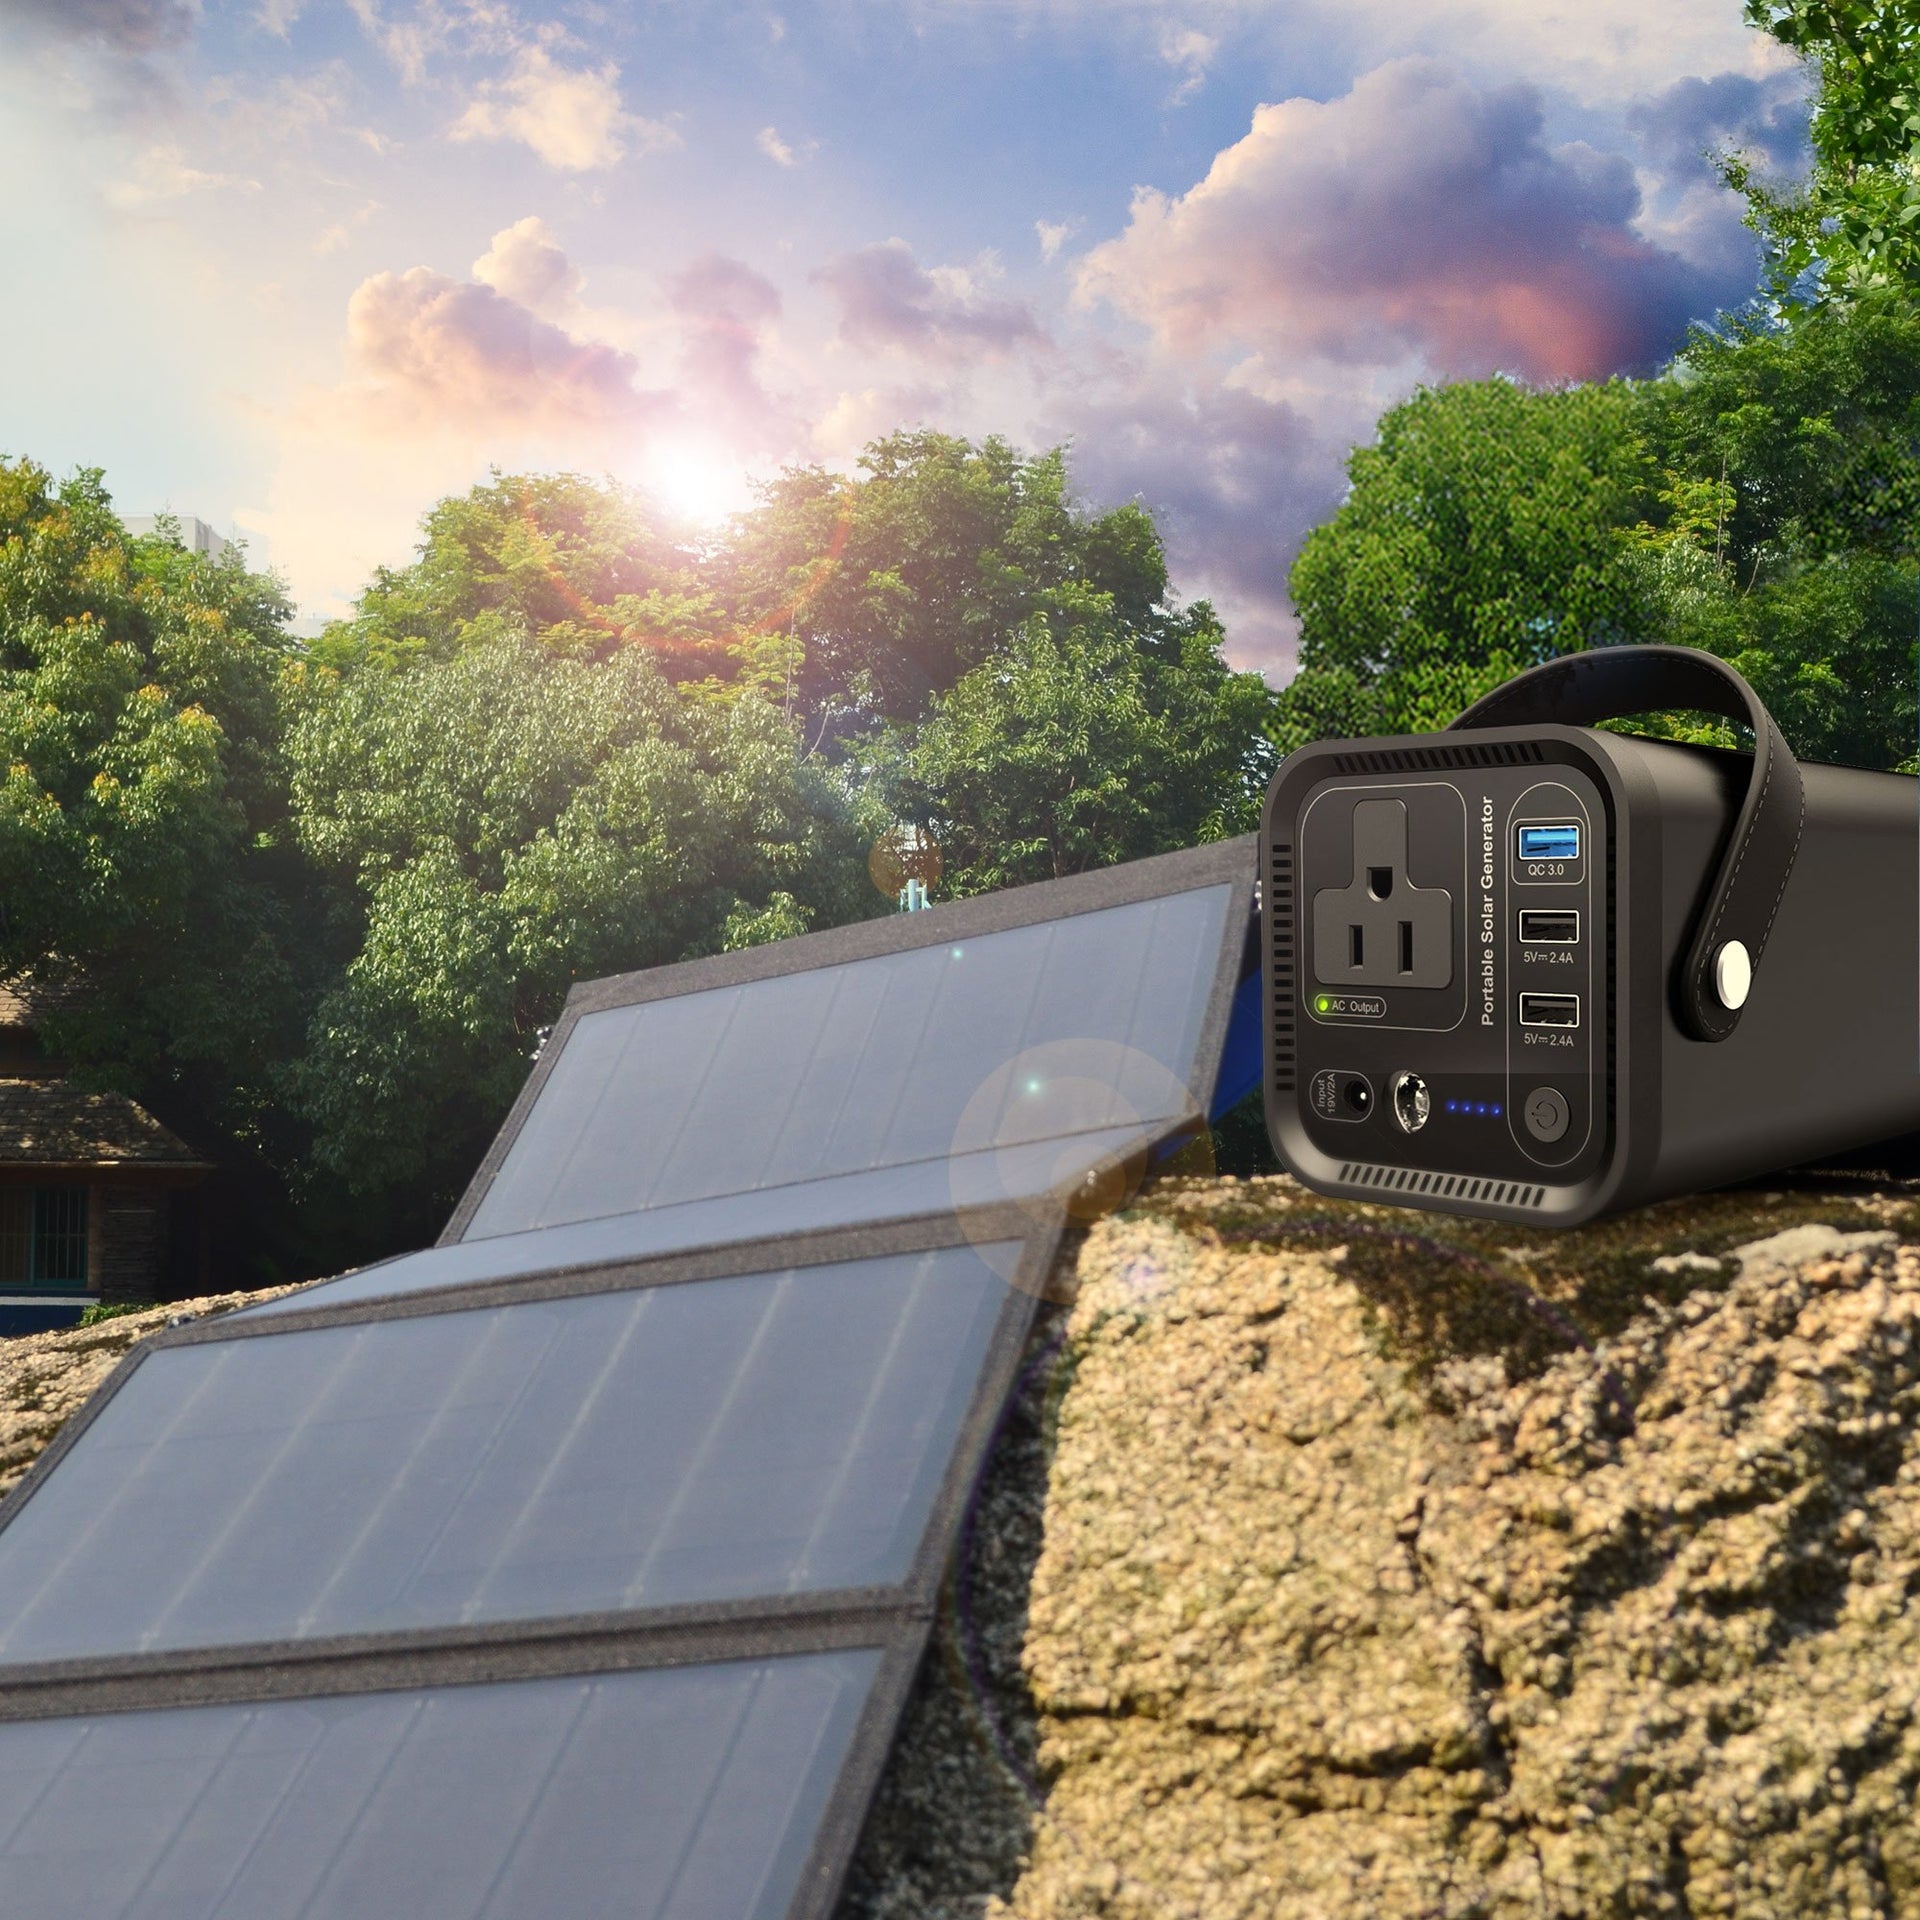 ACOPOWER 154Wh Generator and 50W Portable Solar Panel - Mercantile Mountain